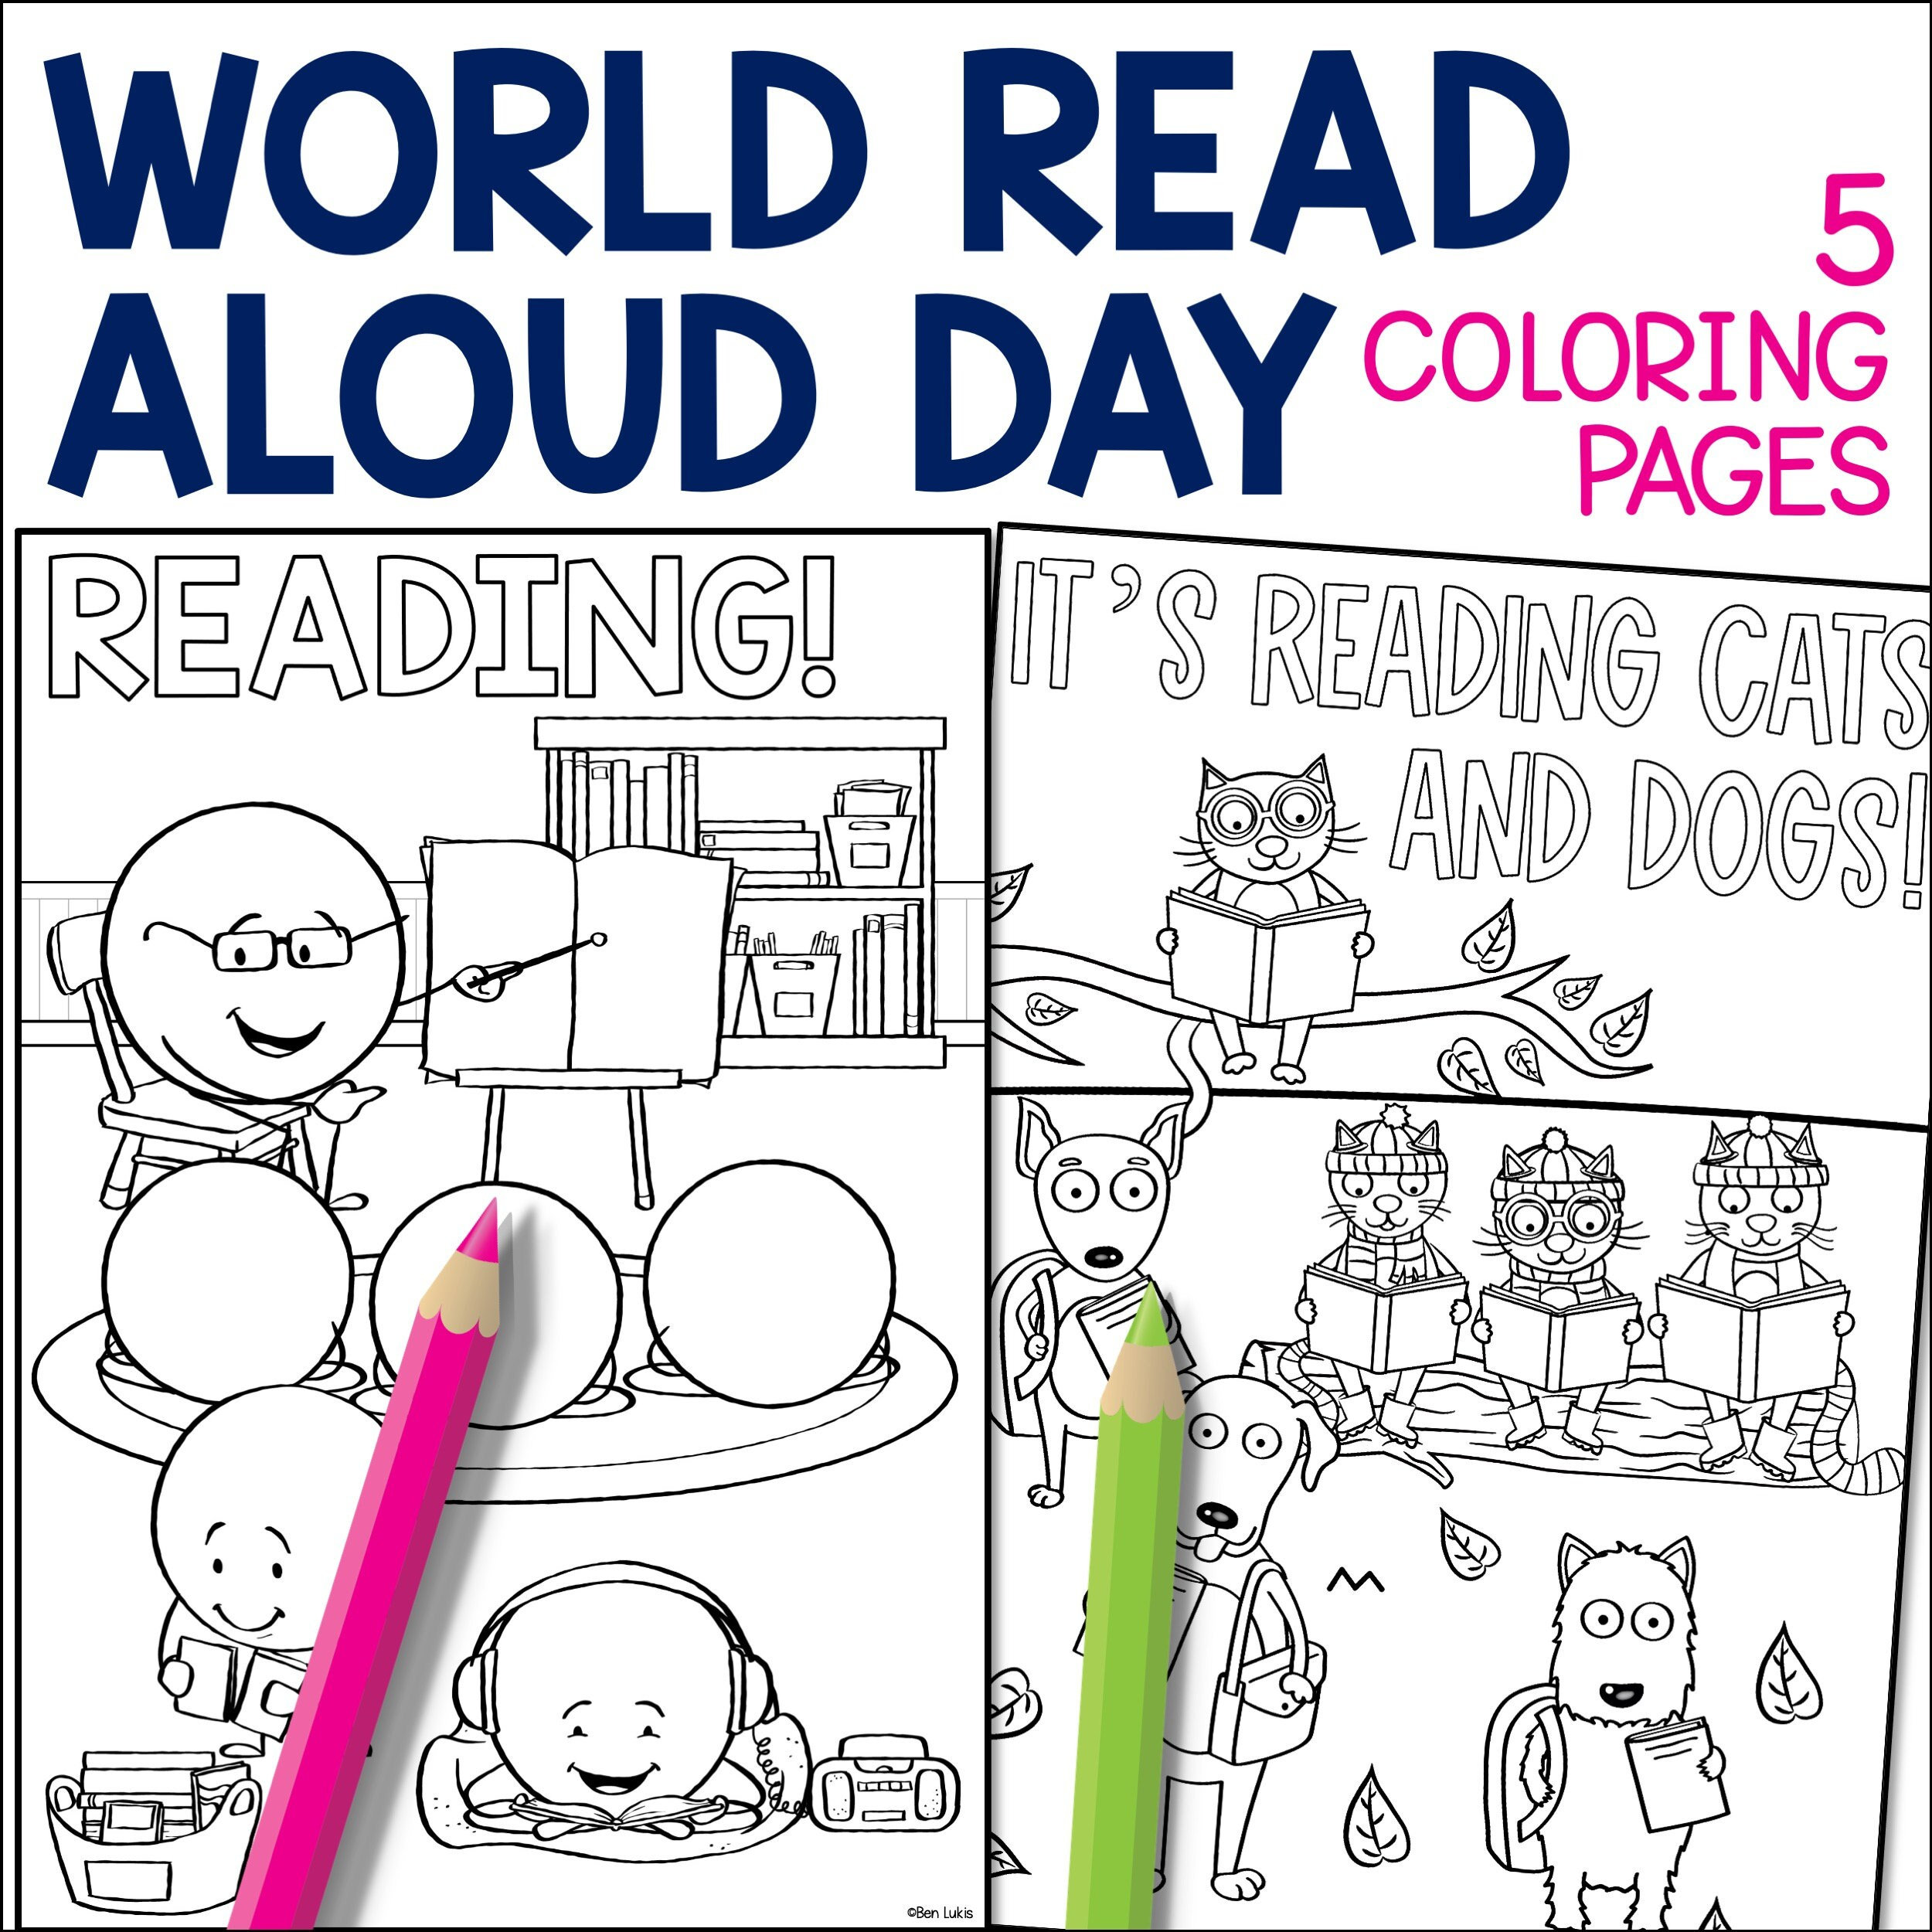 World read aloud day printable coloring pages kids educational activity reading cats and dogs instant download book week